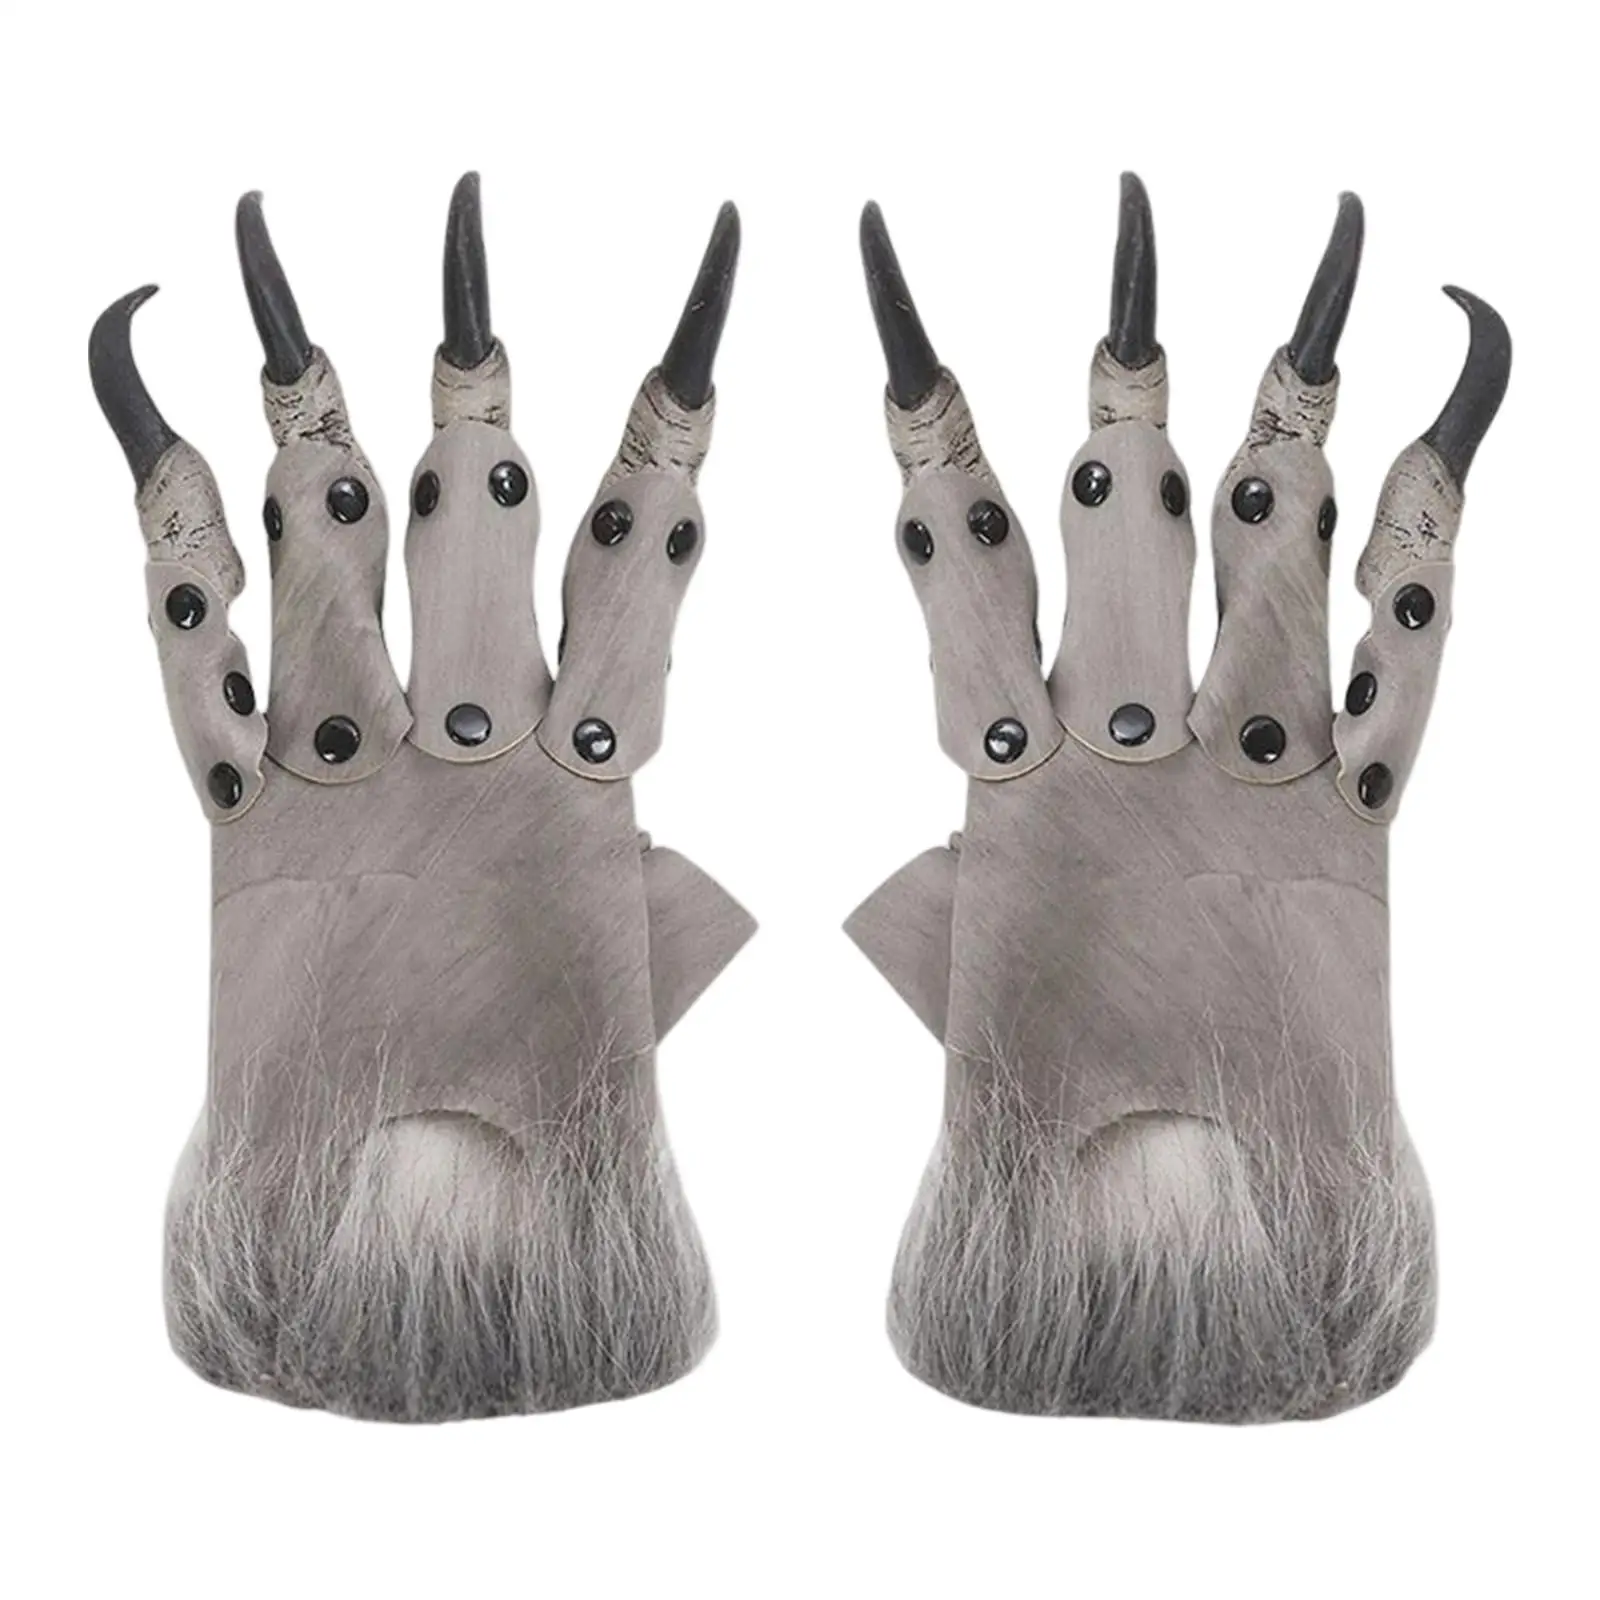 

Hairy Halloween Dragon Glove Costume Claw Dress up Mitts Gift Monster Hands Paws for Carnival Fancy Dress Easter Party Props